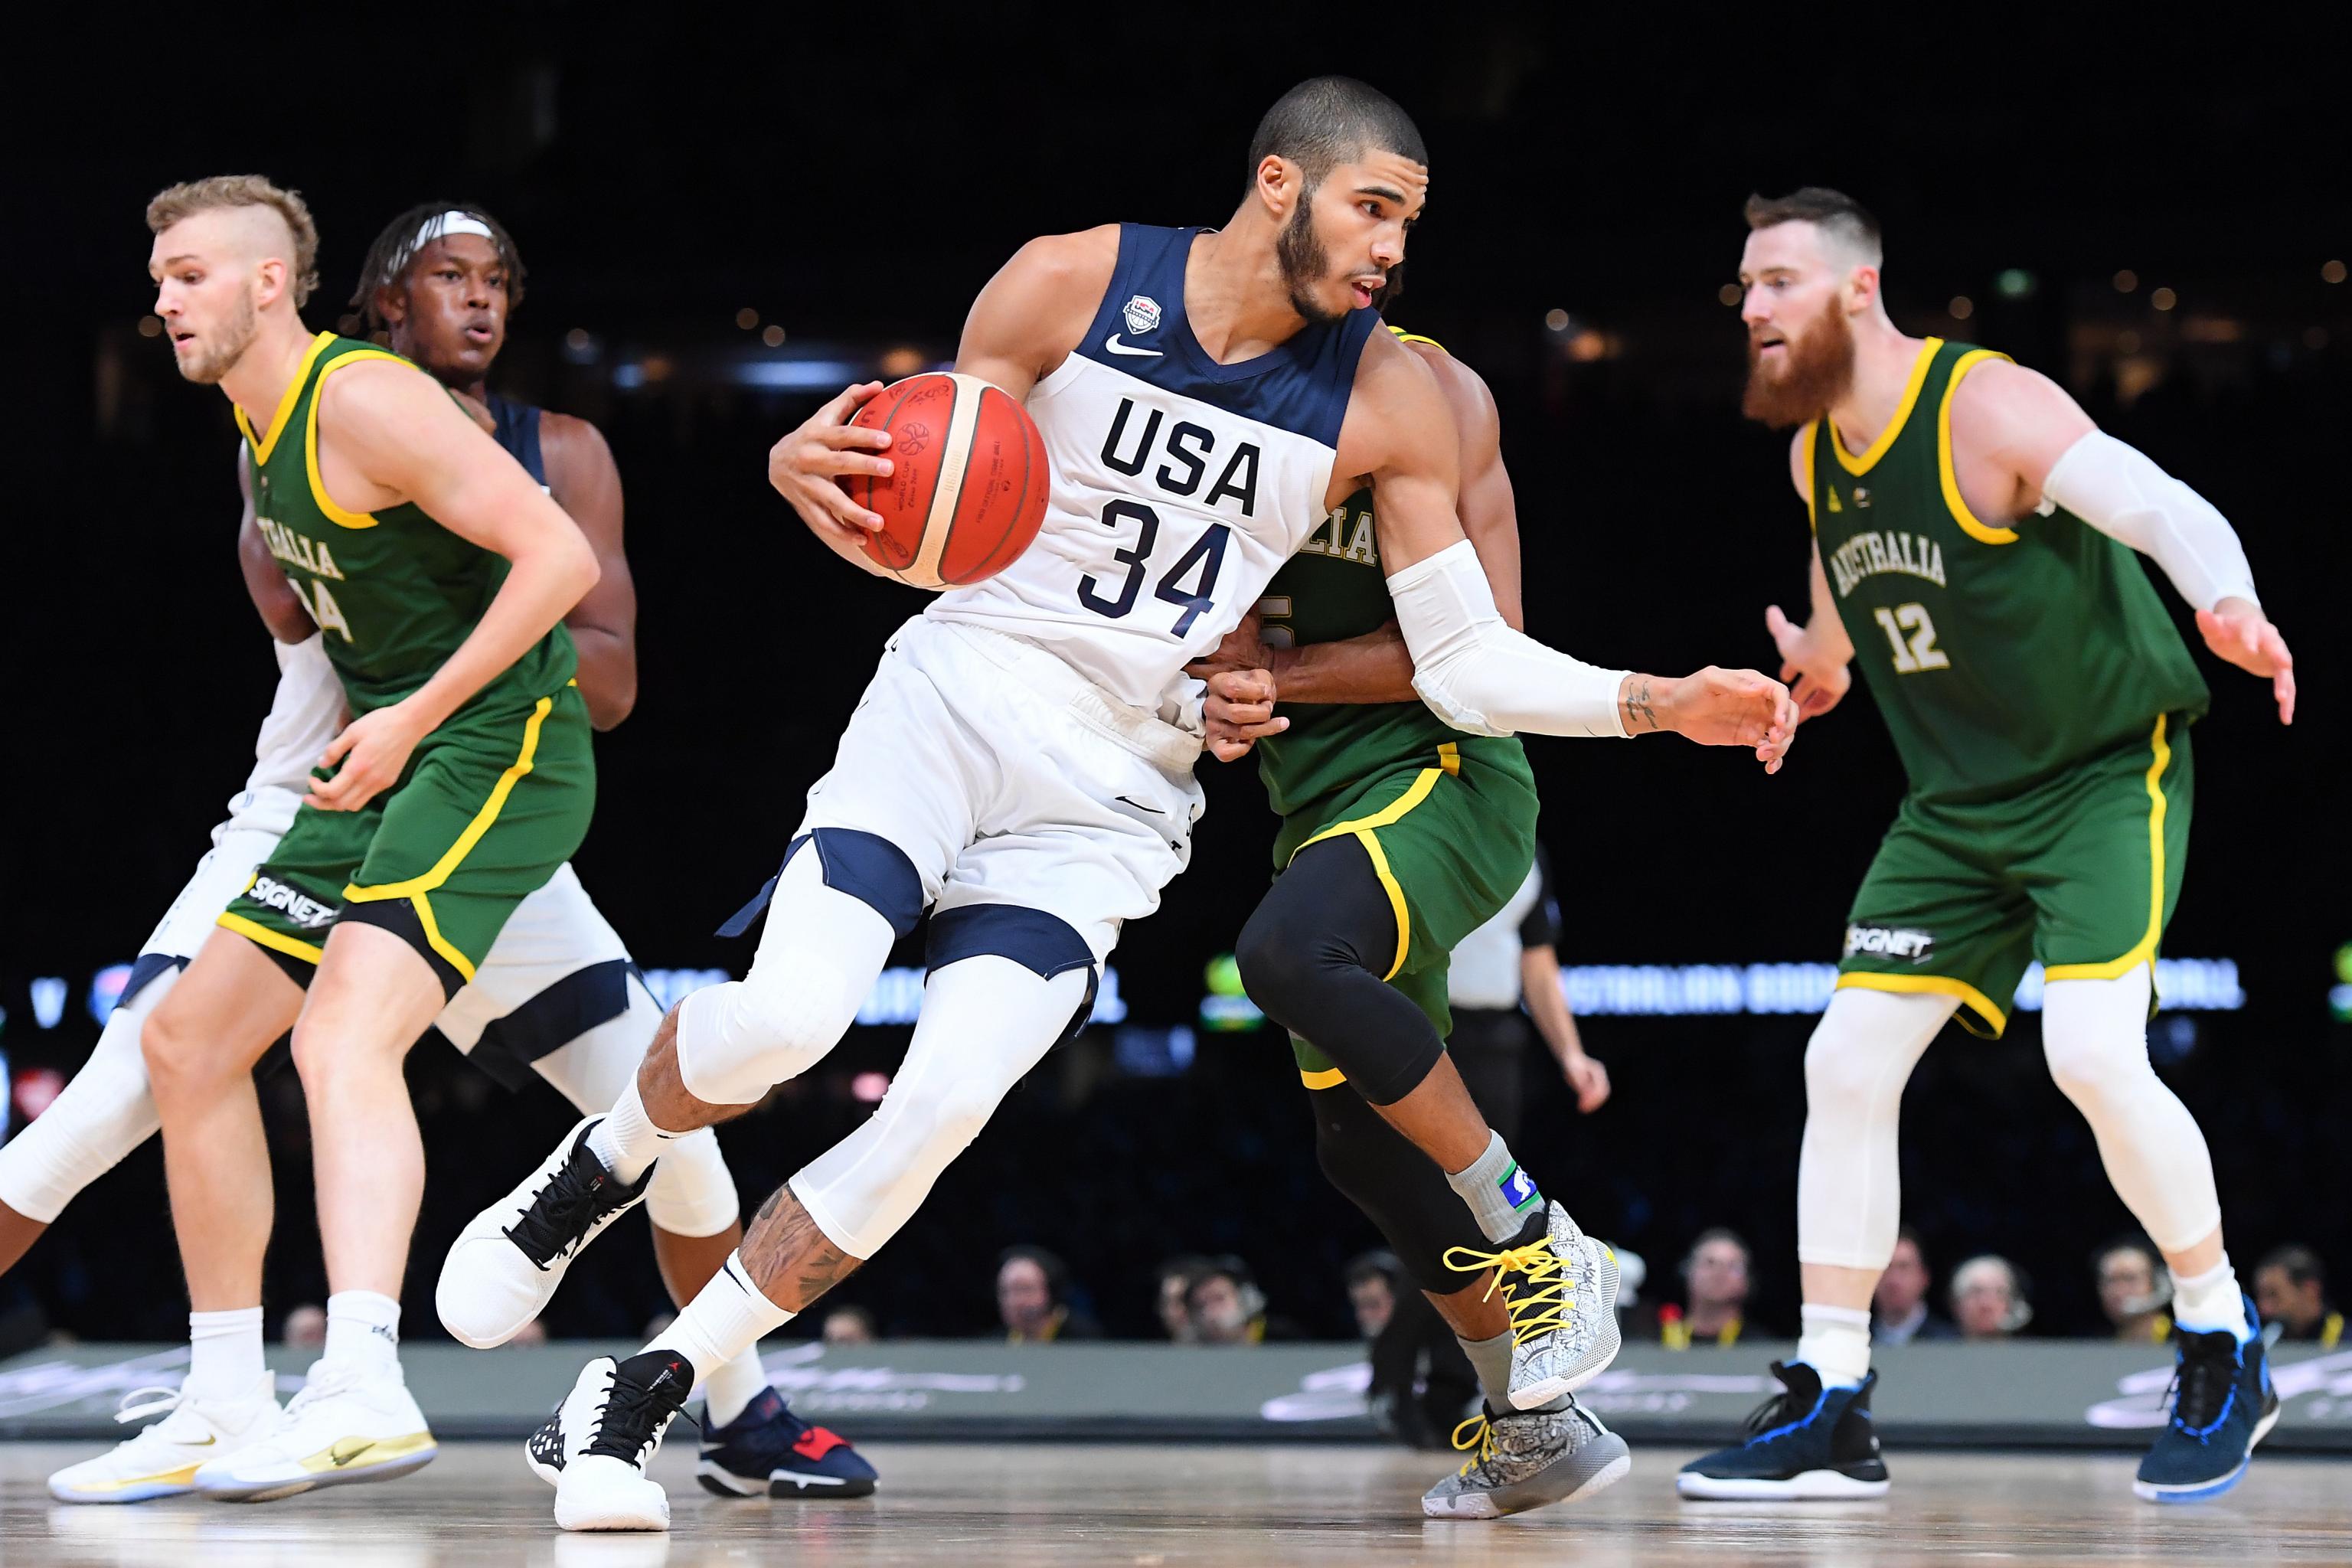 Image result for fiba world cup